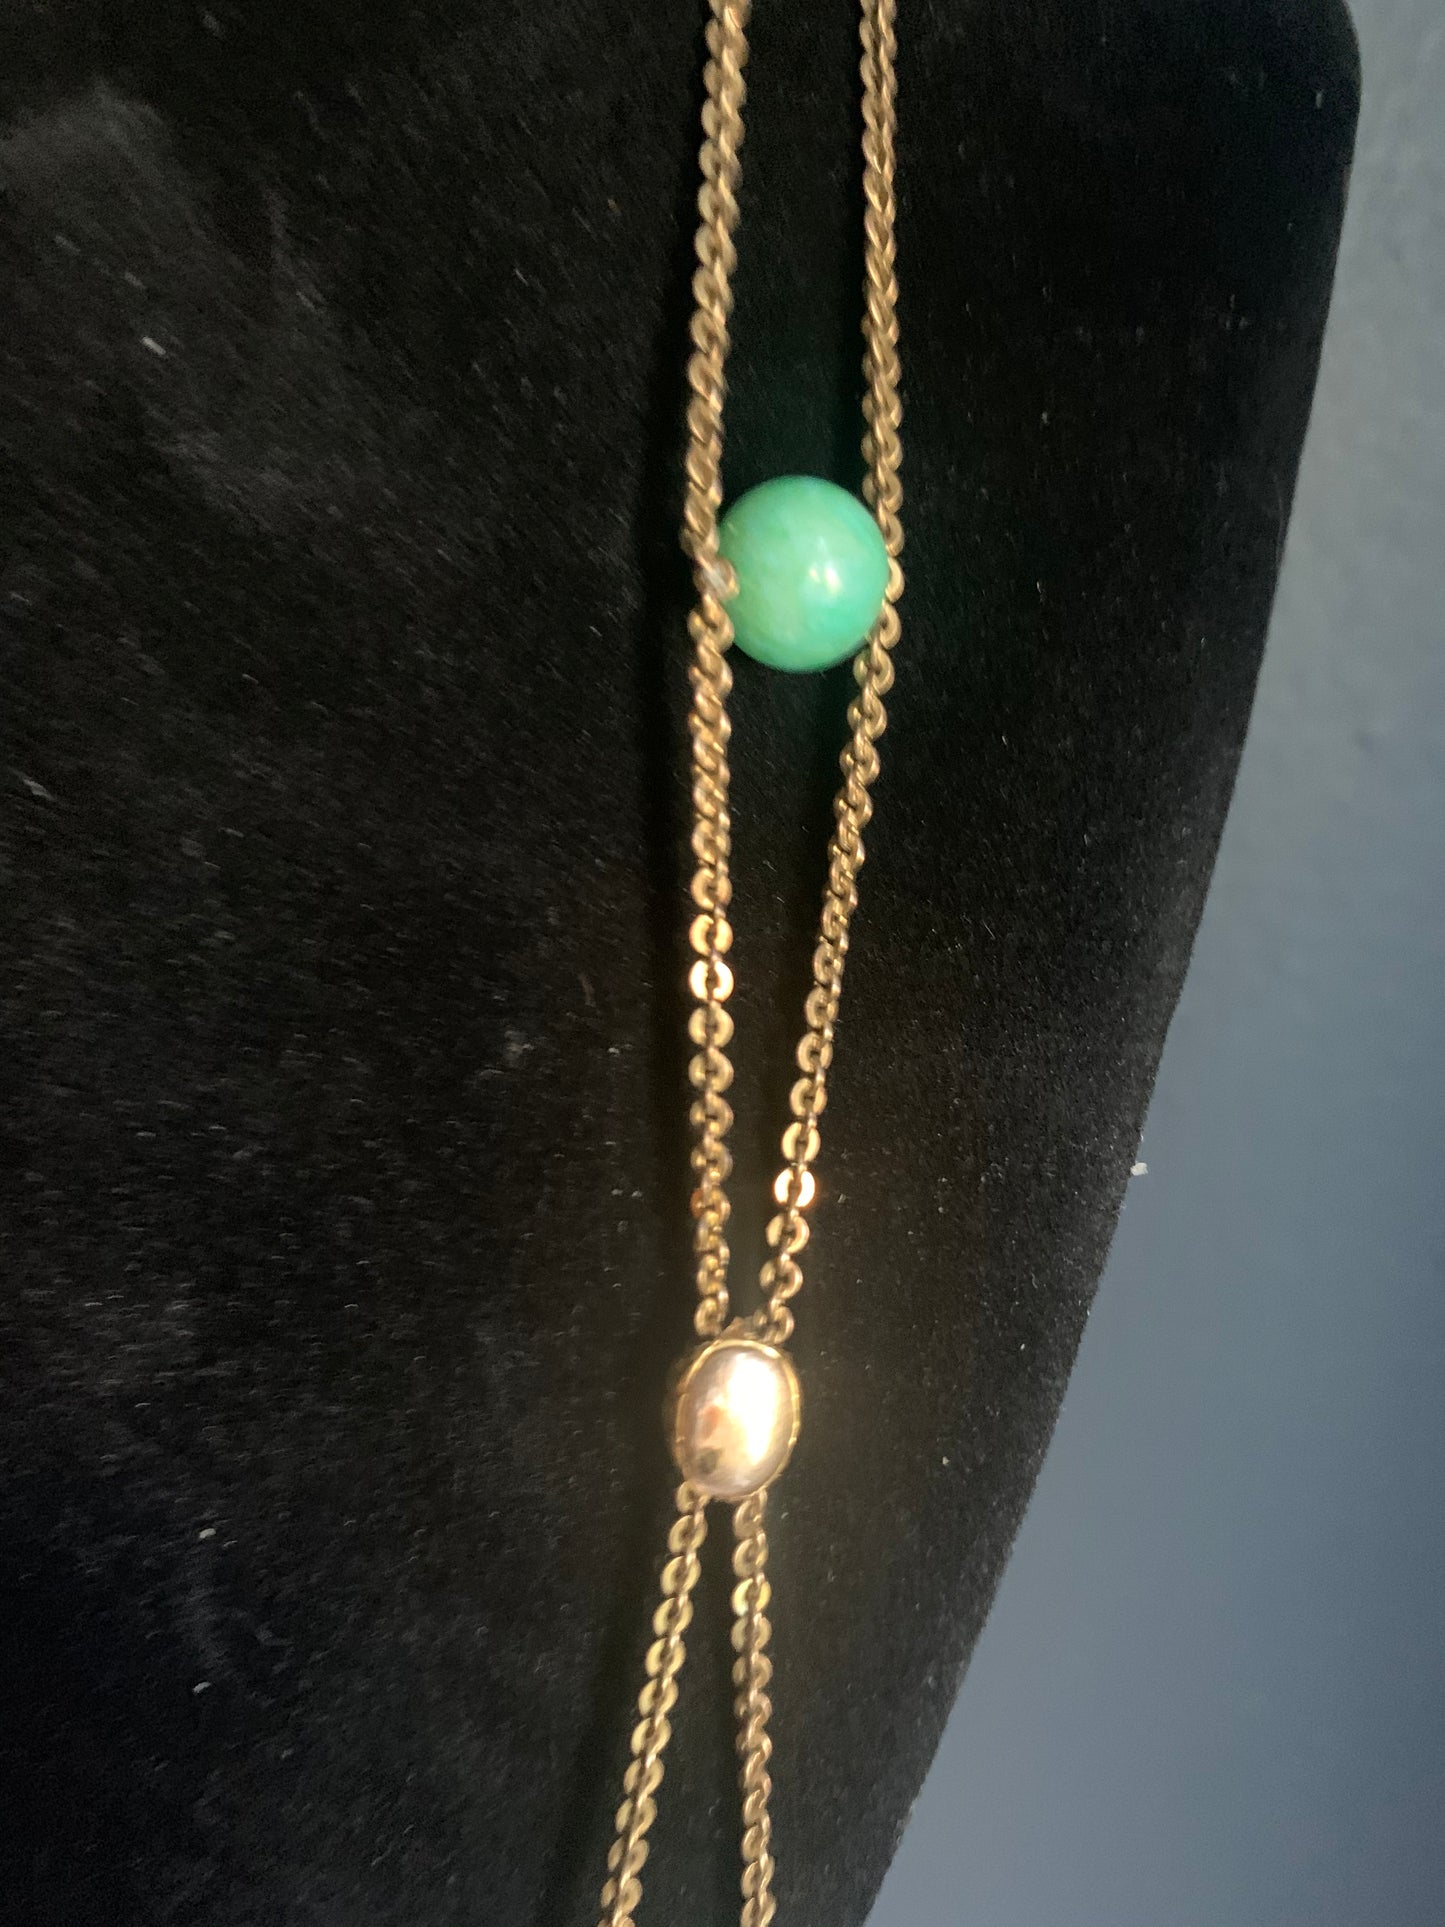 A jade and gold necklace